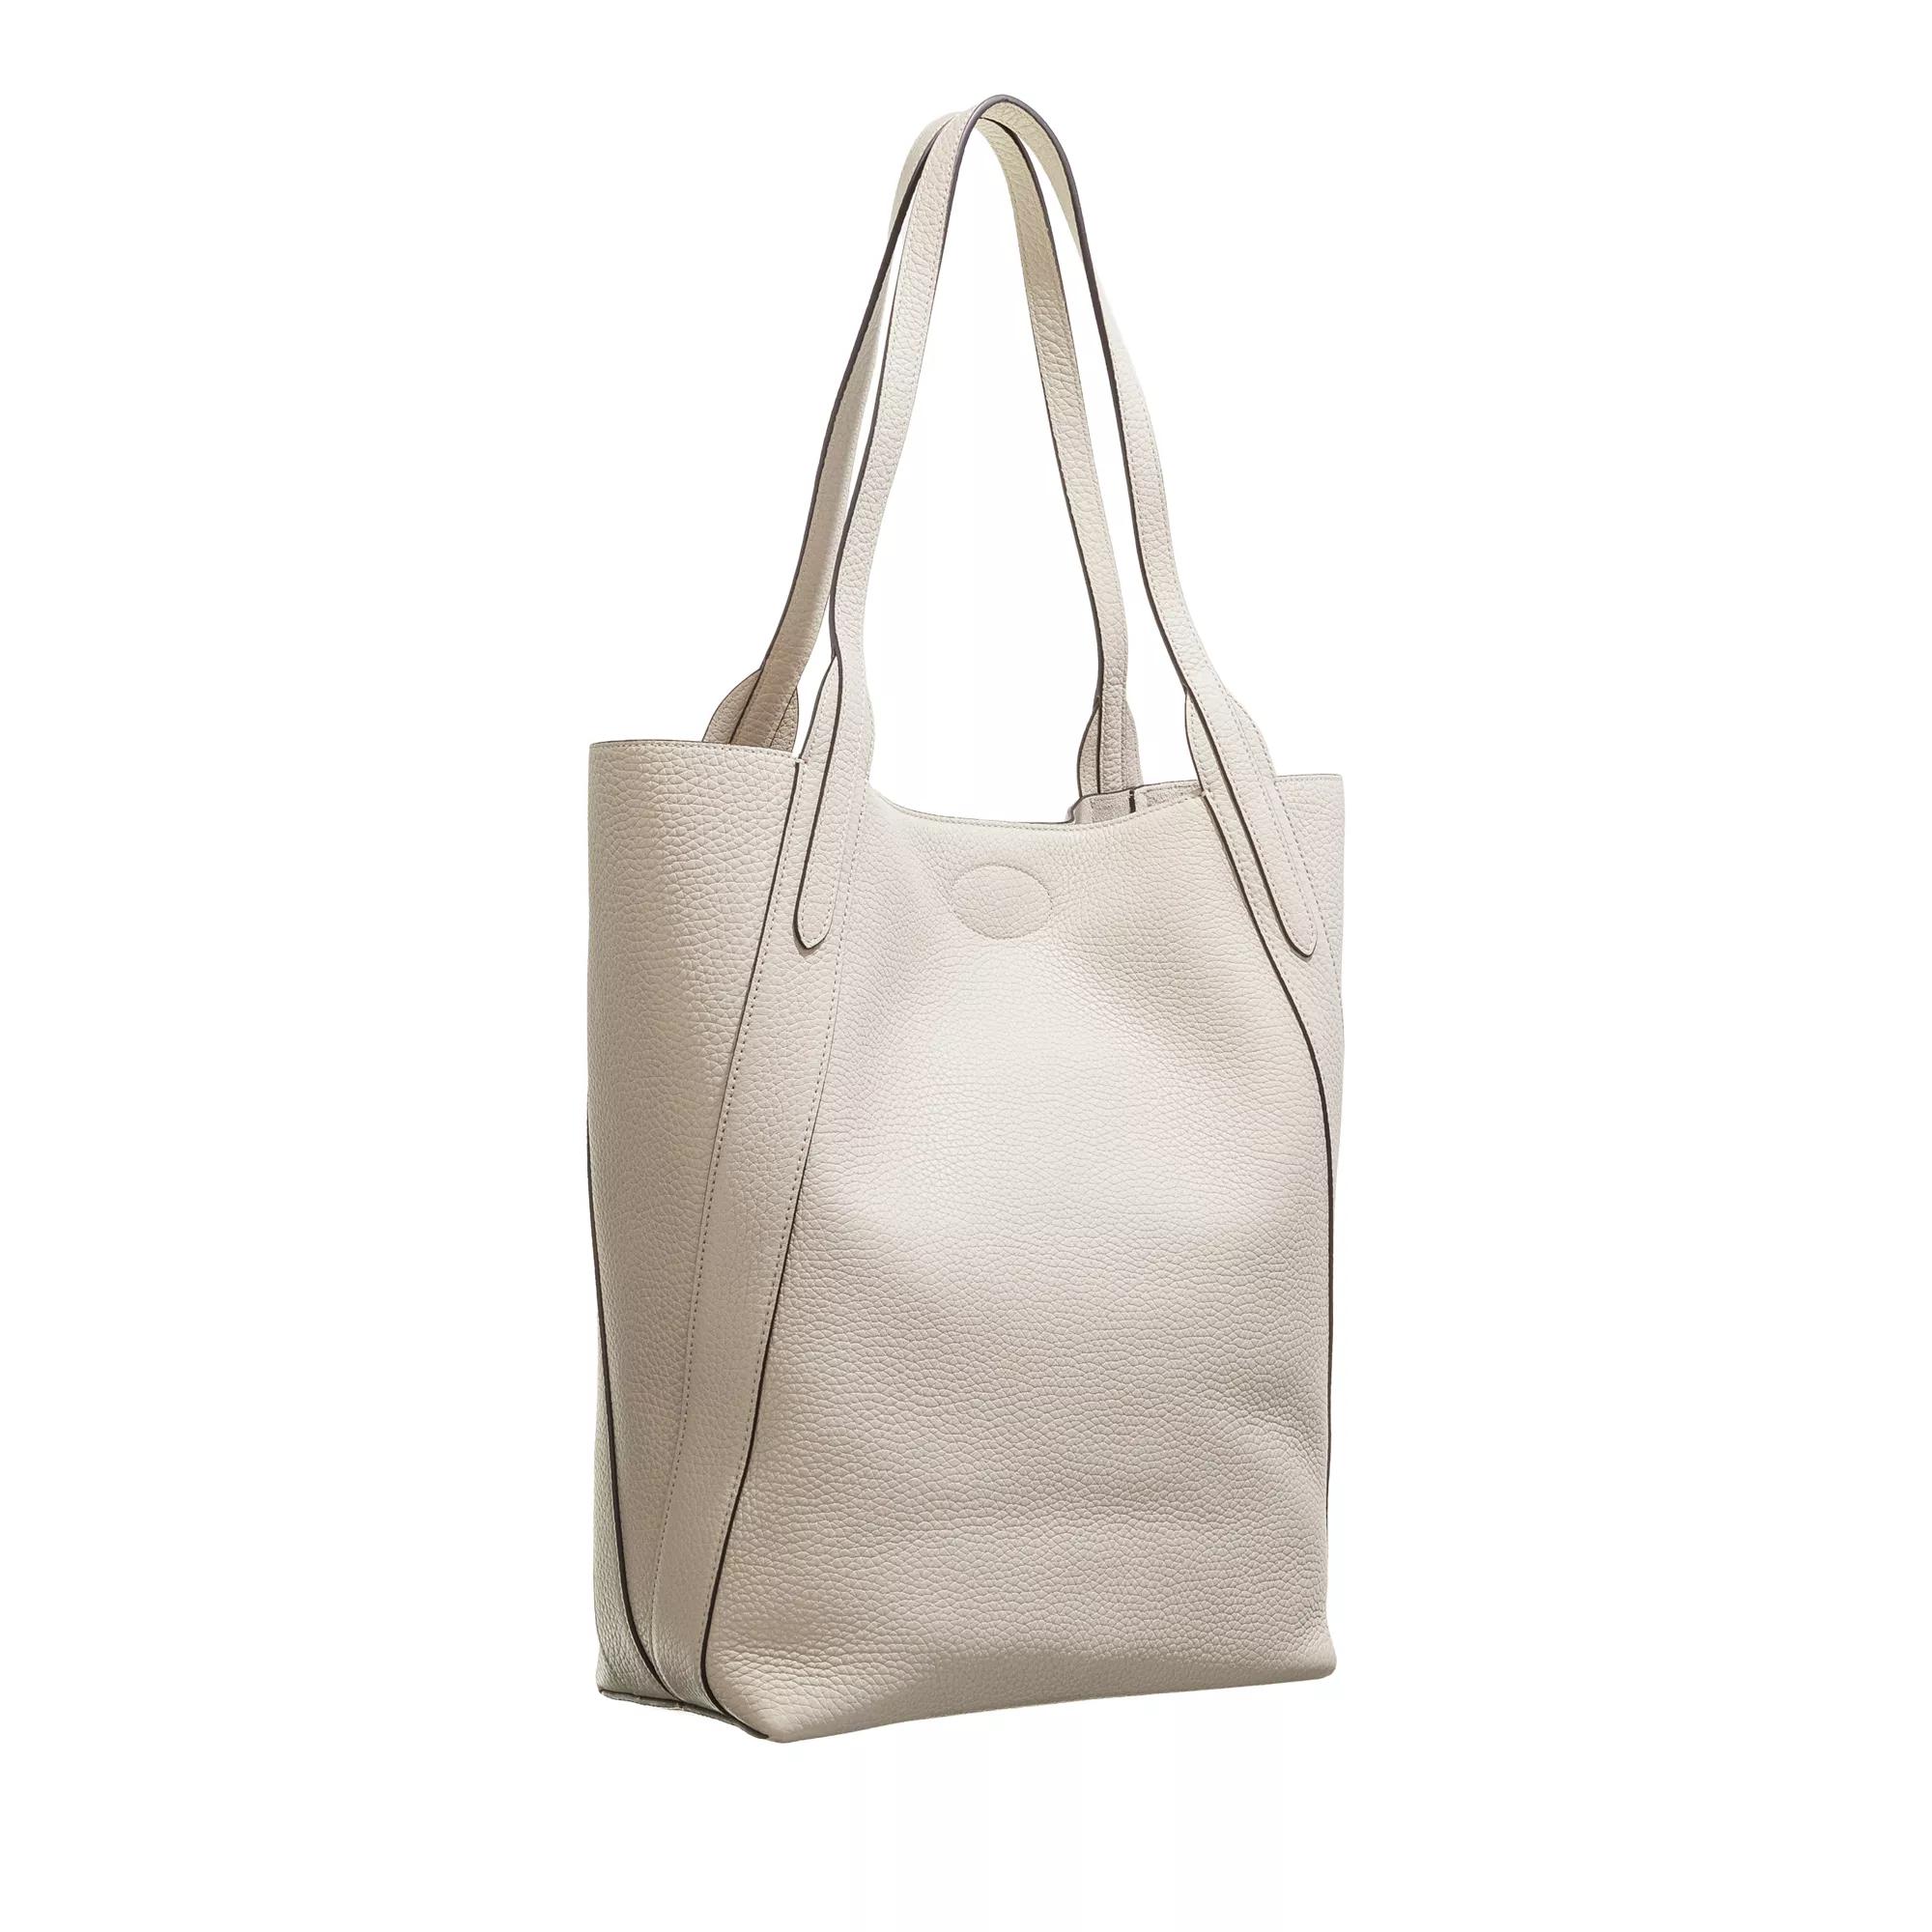 Mulberry Shoppers North South Bayswater Tote in grijs